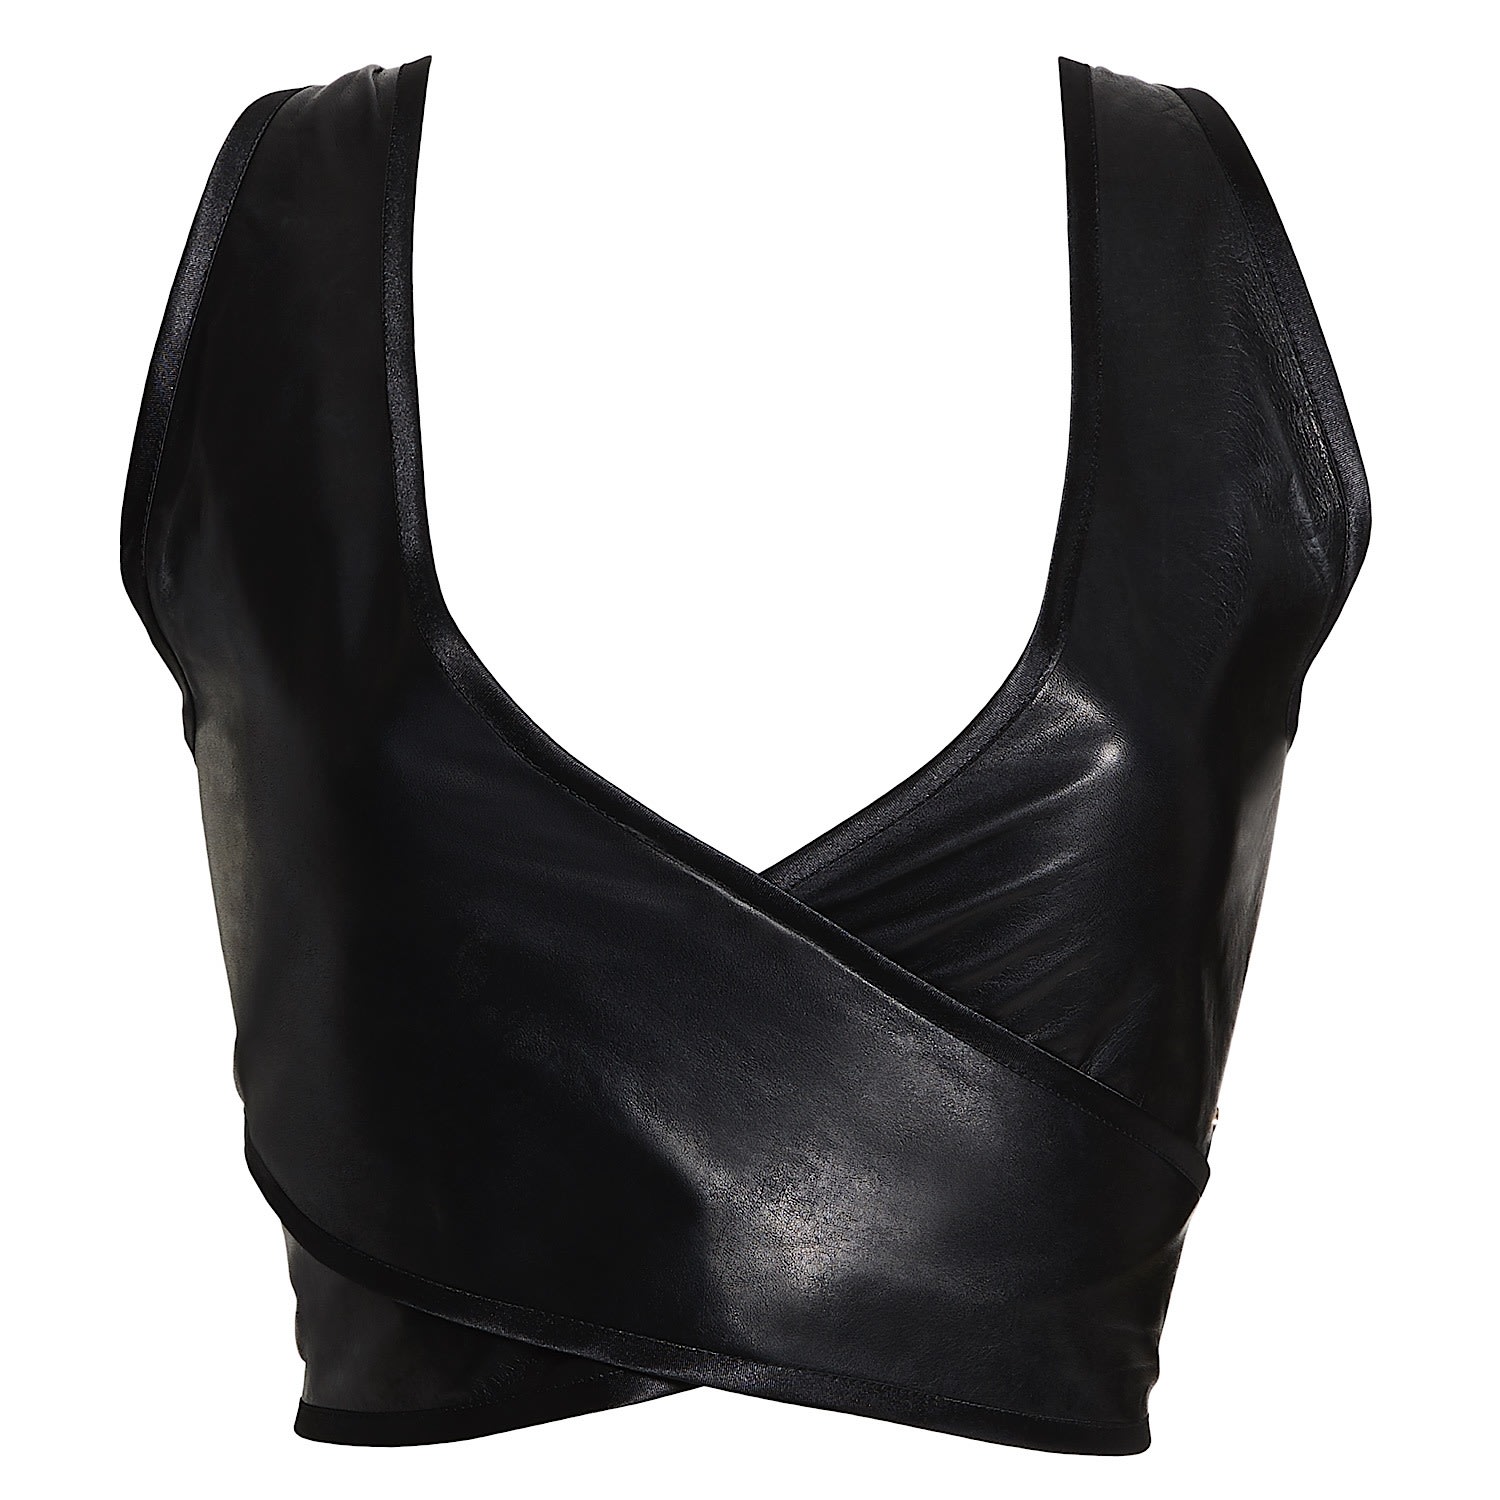 Something Wicked - Lexi Leather Wrap Over Soft Cup Bra